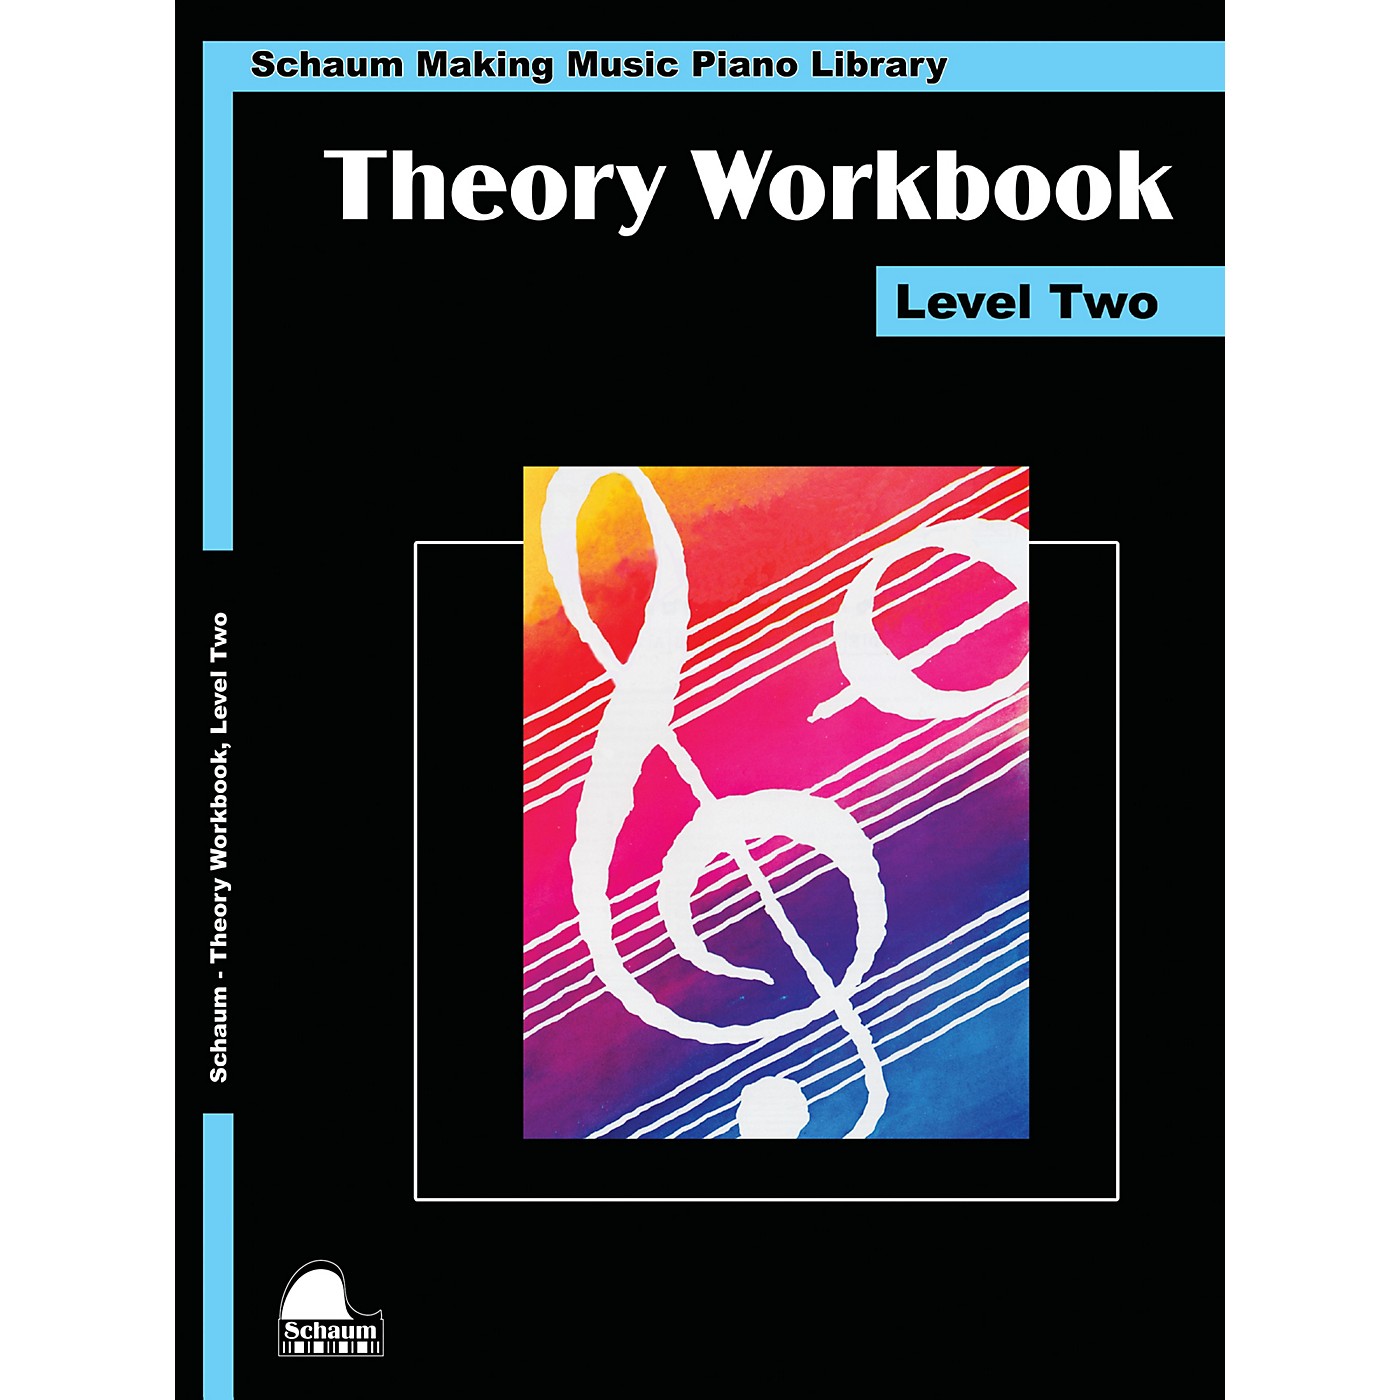 Schaum Theory Workbook - Level 2 Educational Piano Book by Wesley Schaum thumbnail